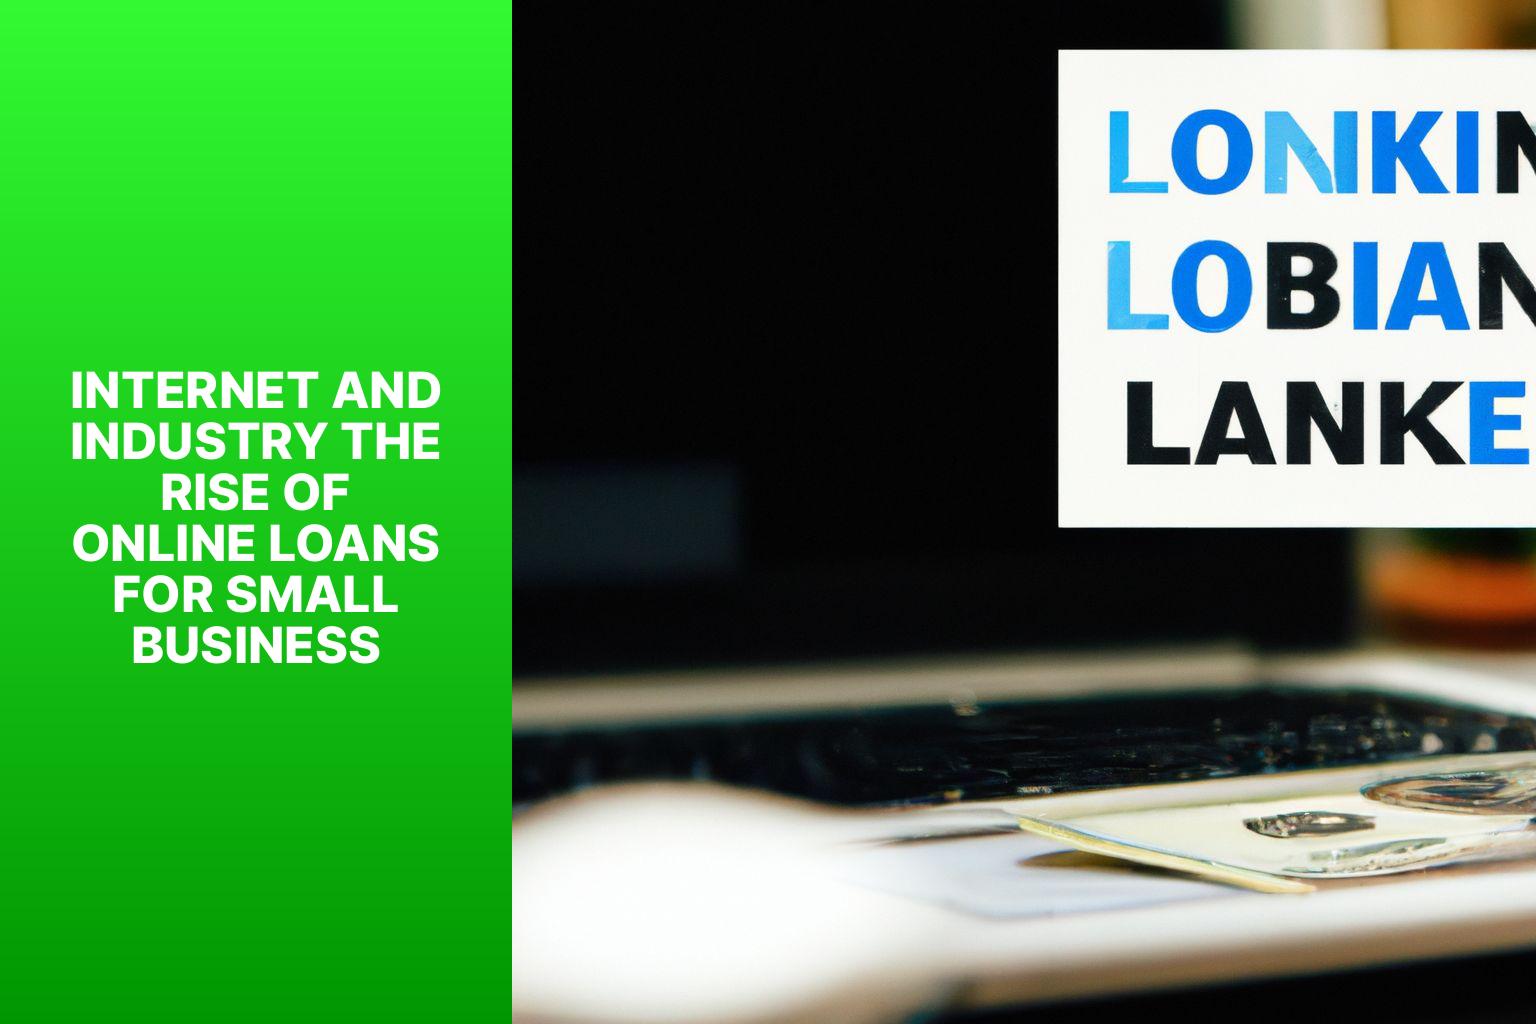 Internet and Industry The Rise of Online Loans for Small Business